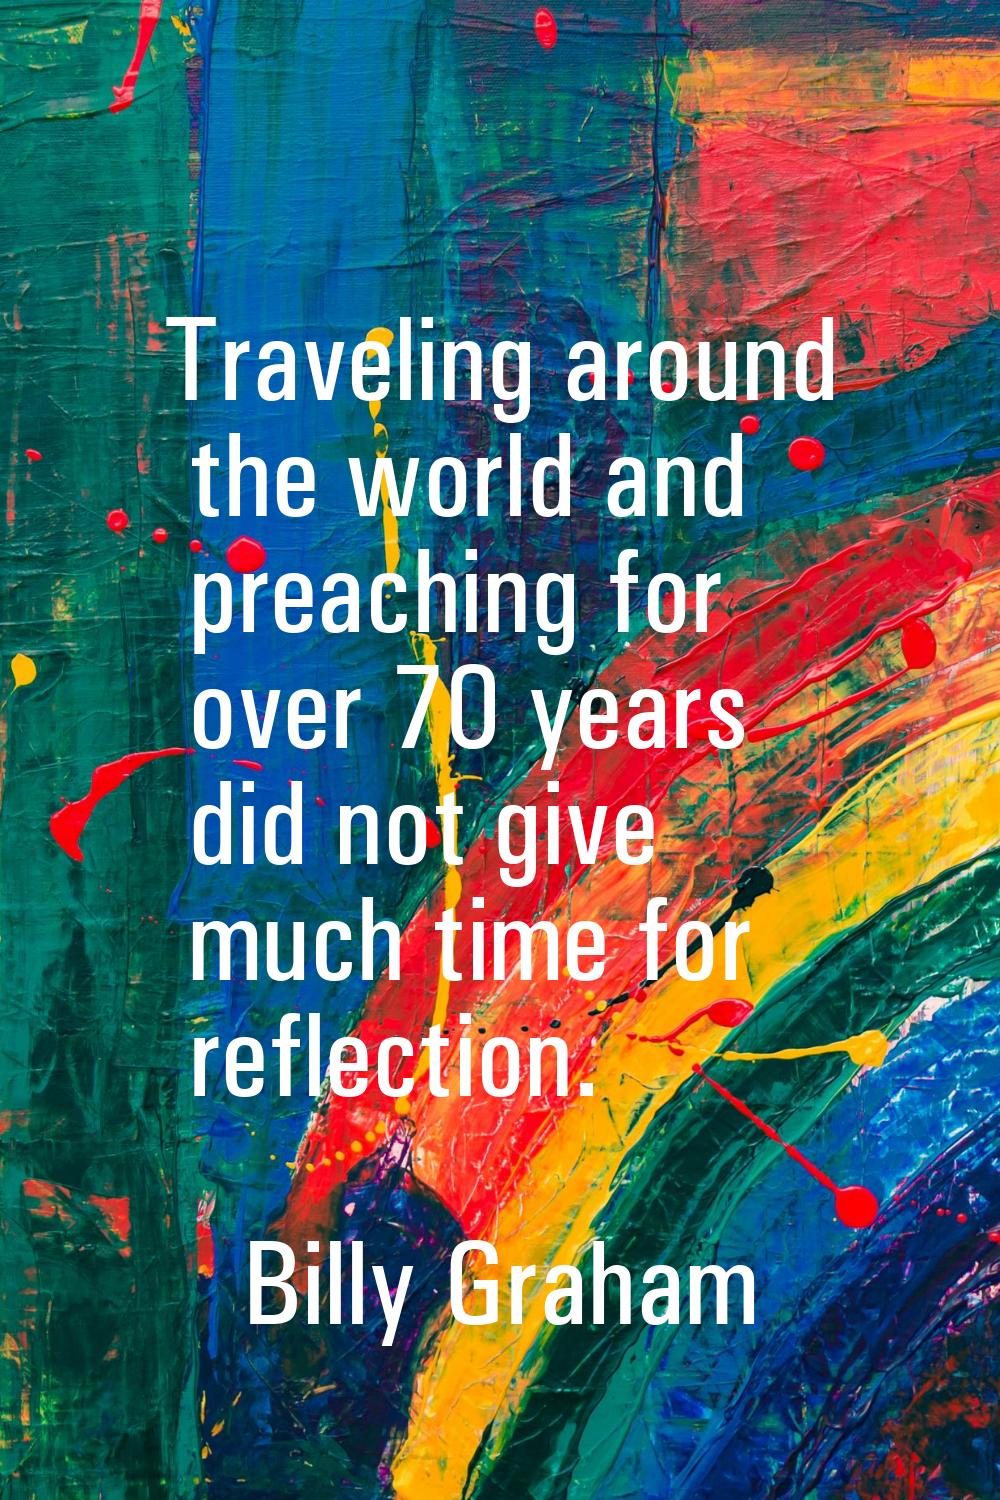 Traveling around the world and preaching for over 70 years did not give much time for reflection.